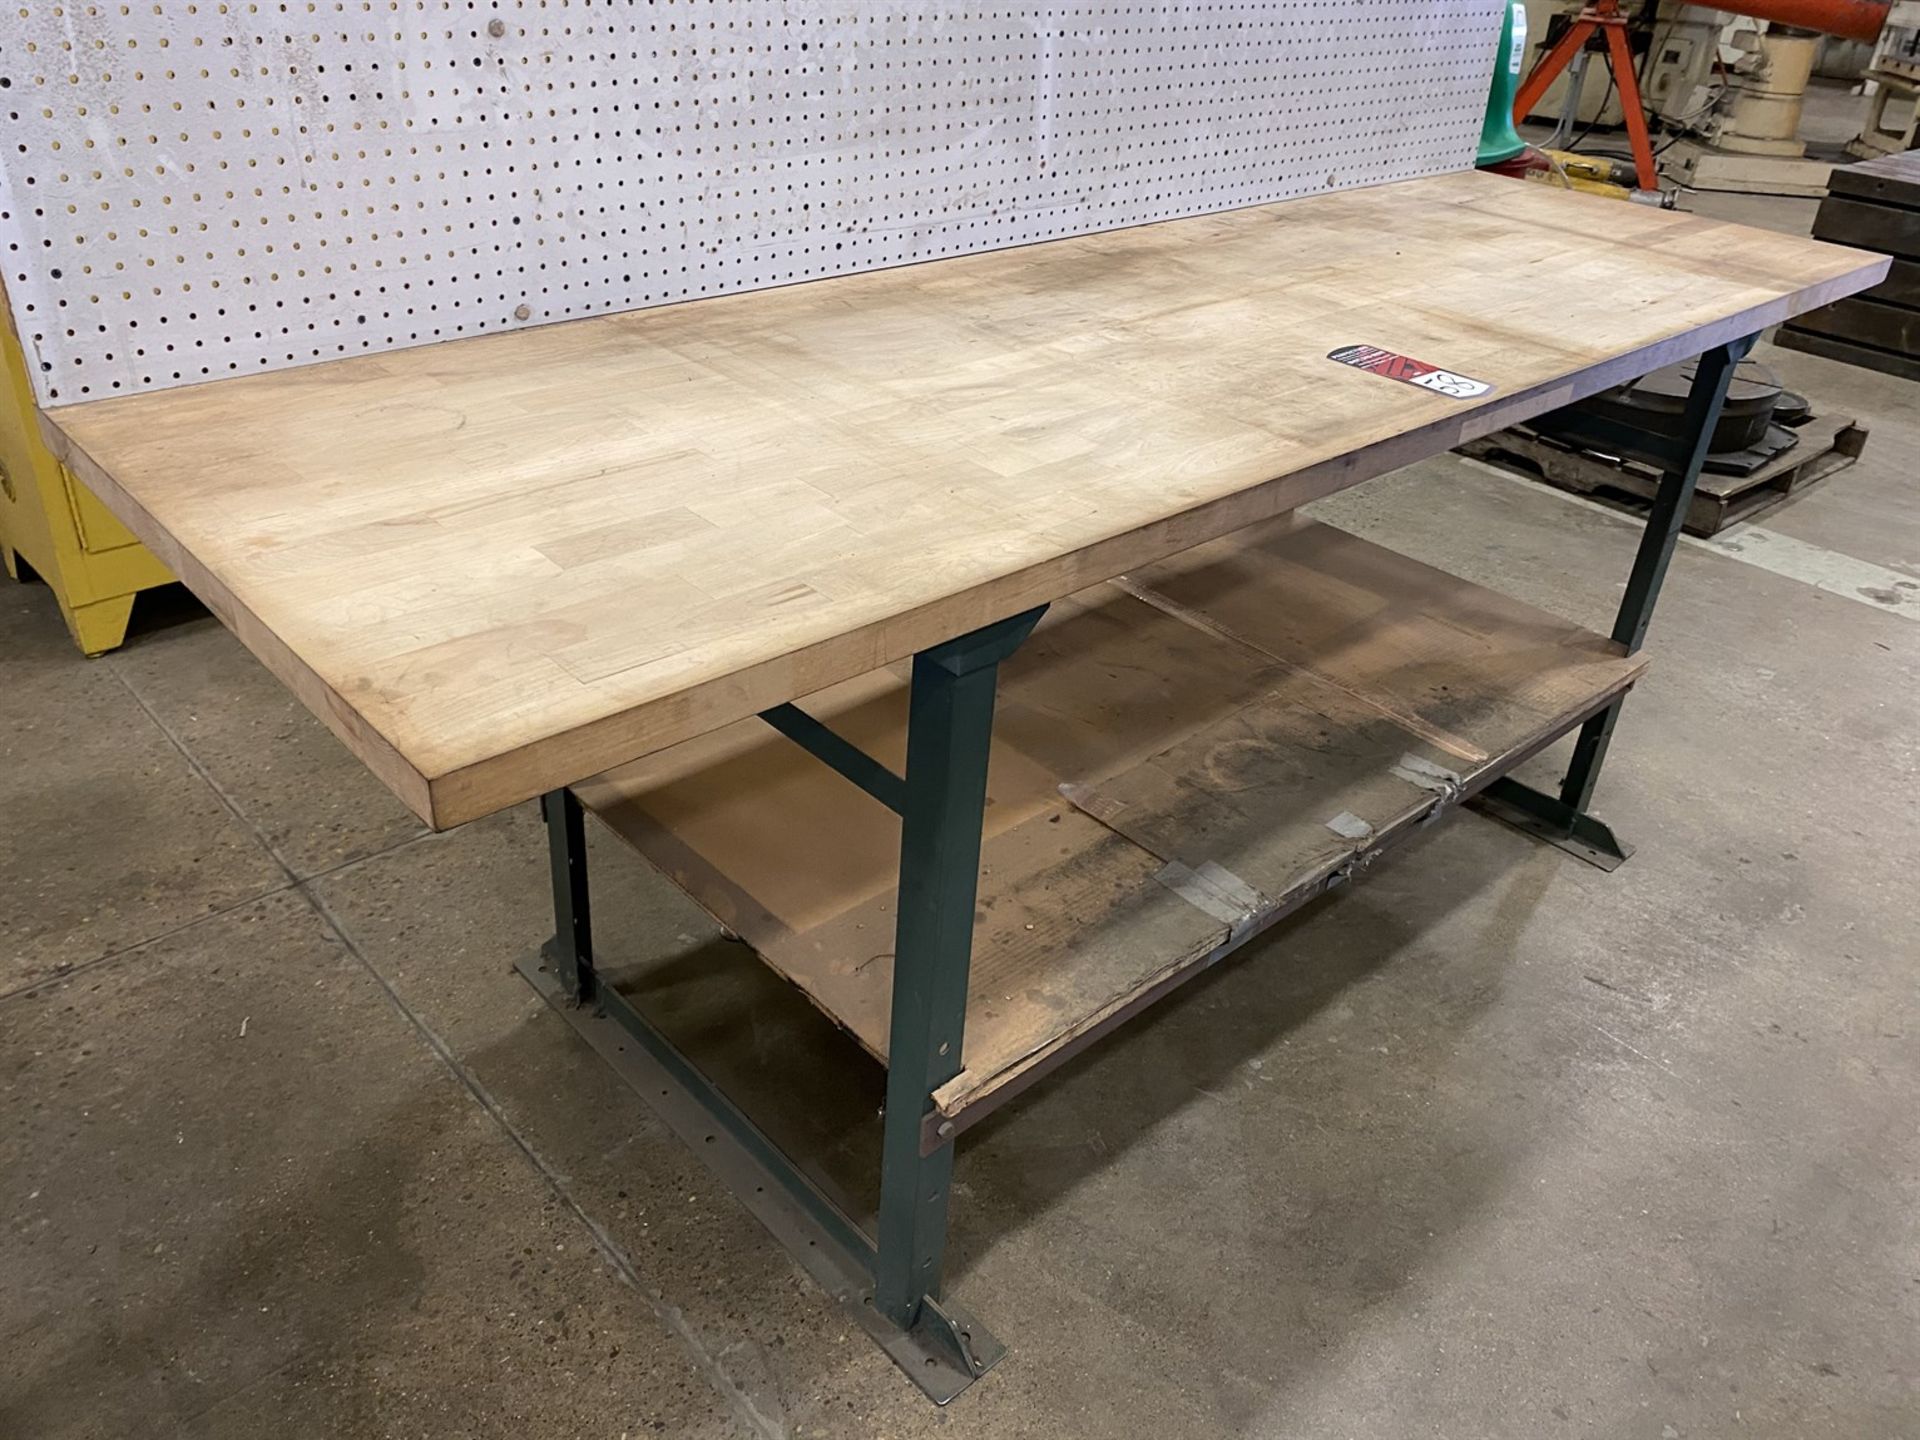 Wood Top Work Bench w/ Peg Board, 36" x 96" - Image 2 of 2